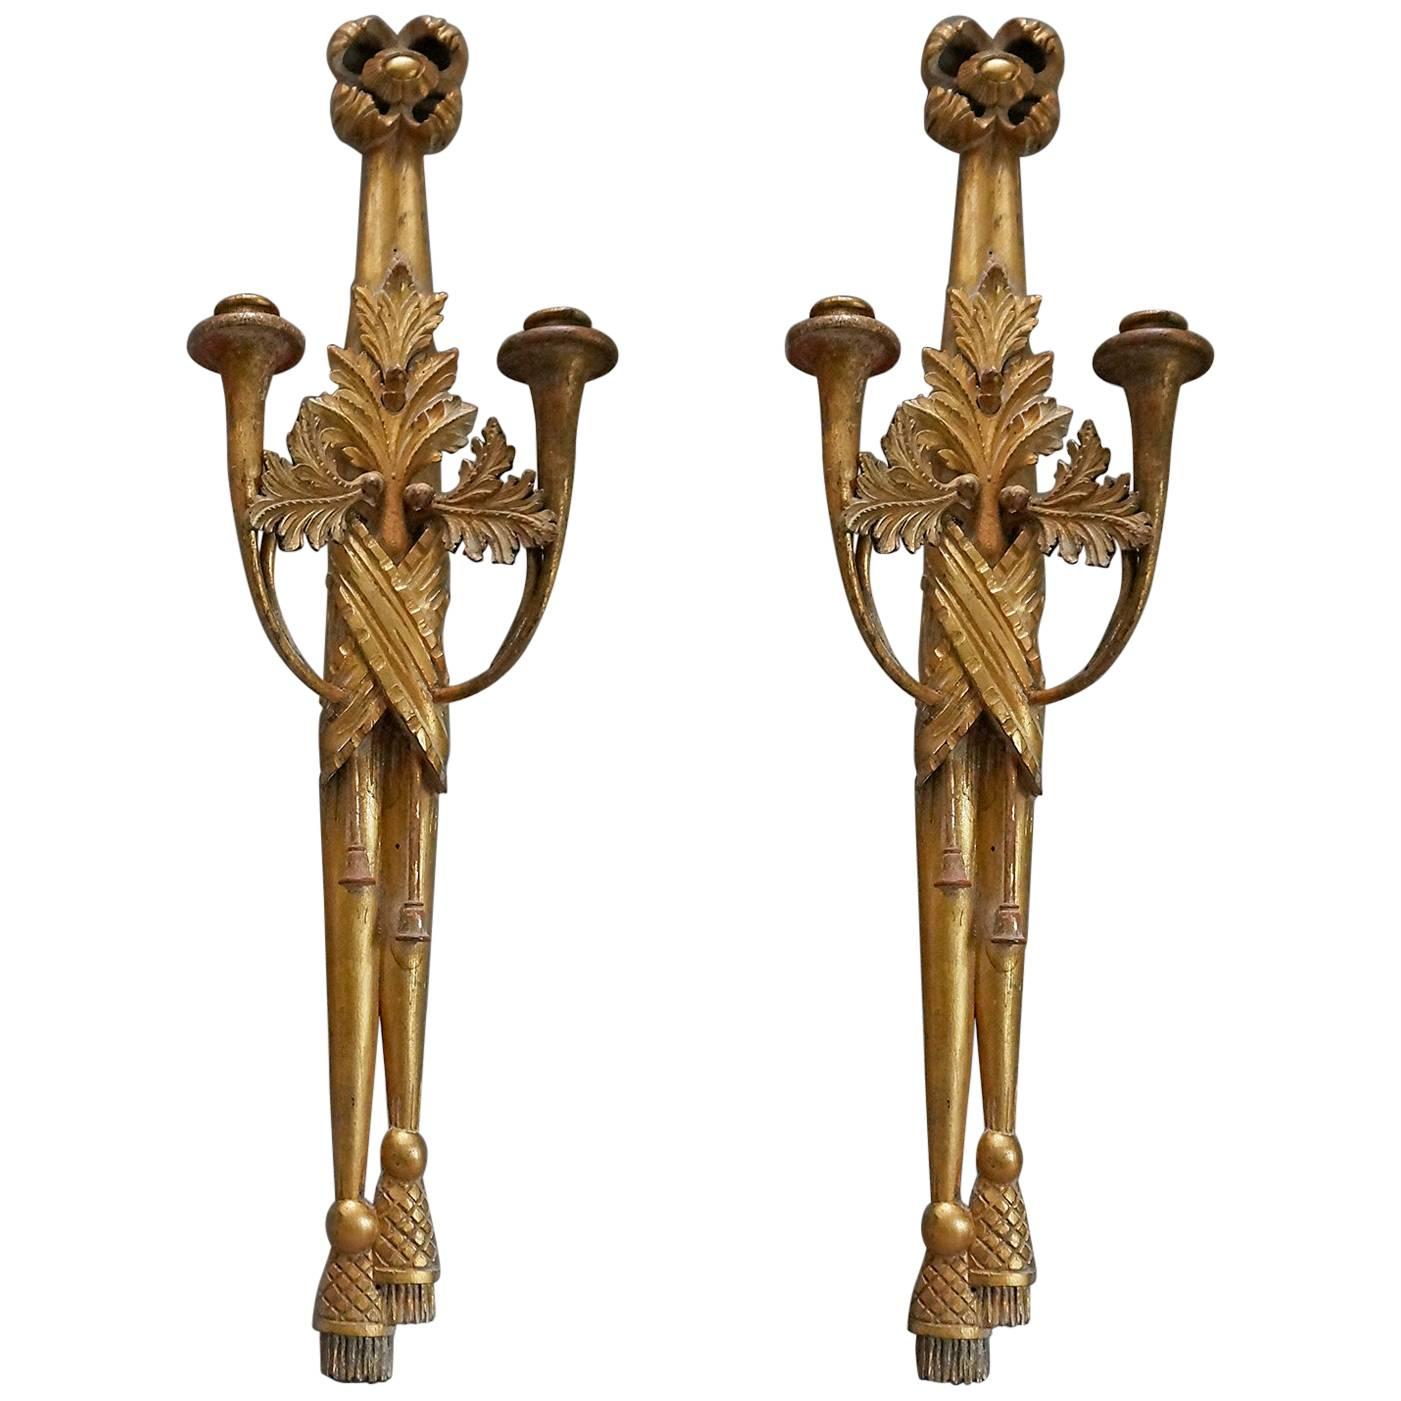 Pair of Swedish Empire Candle Sconces